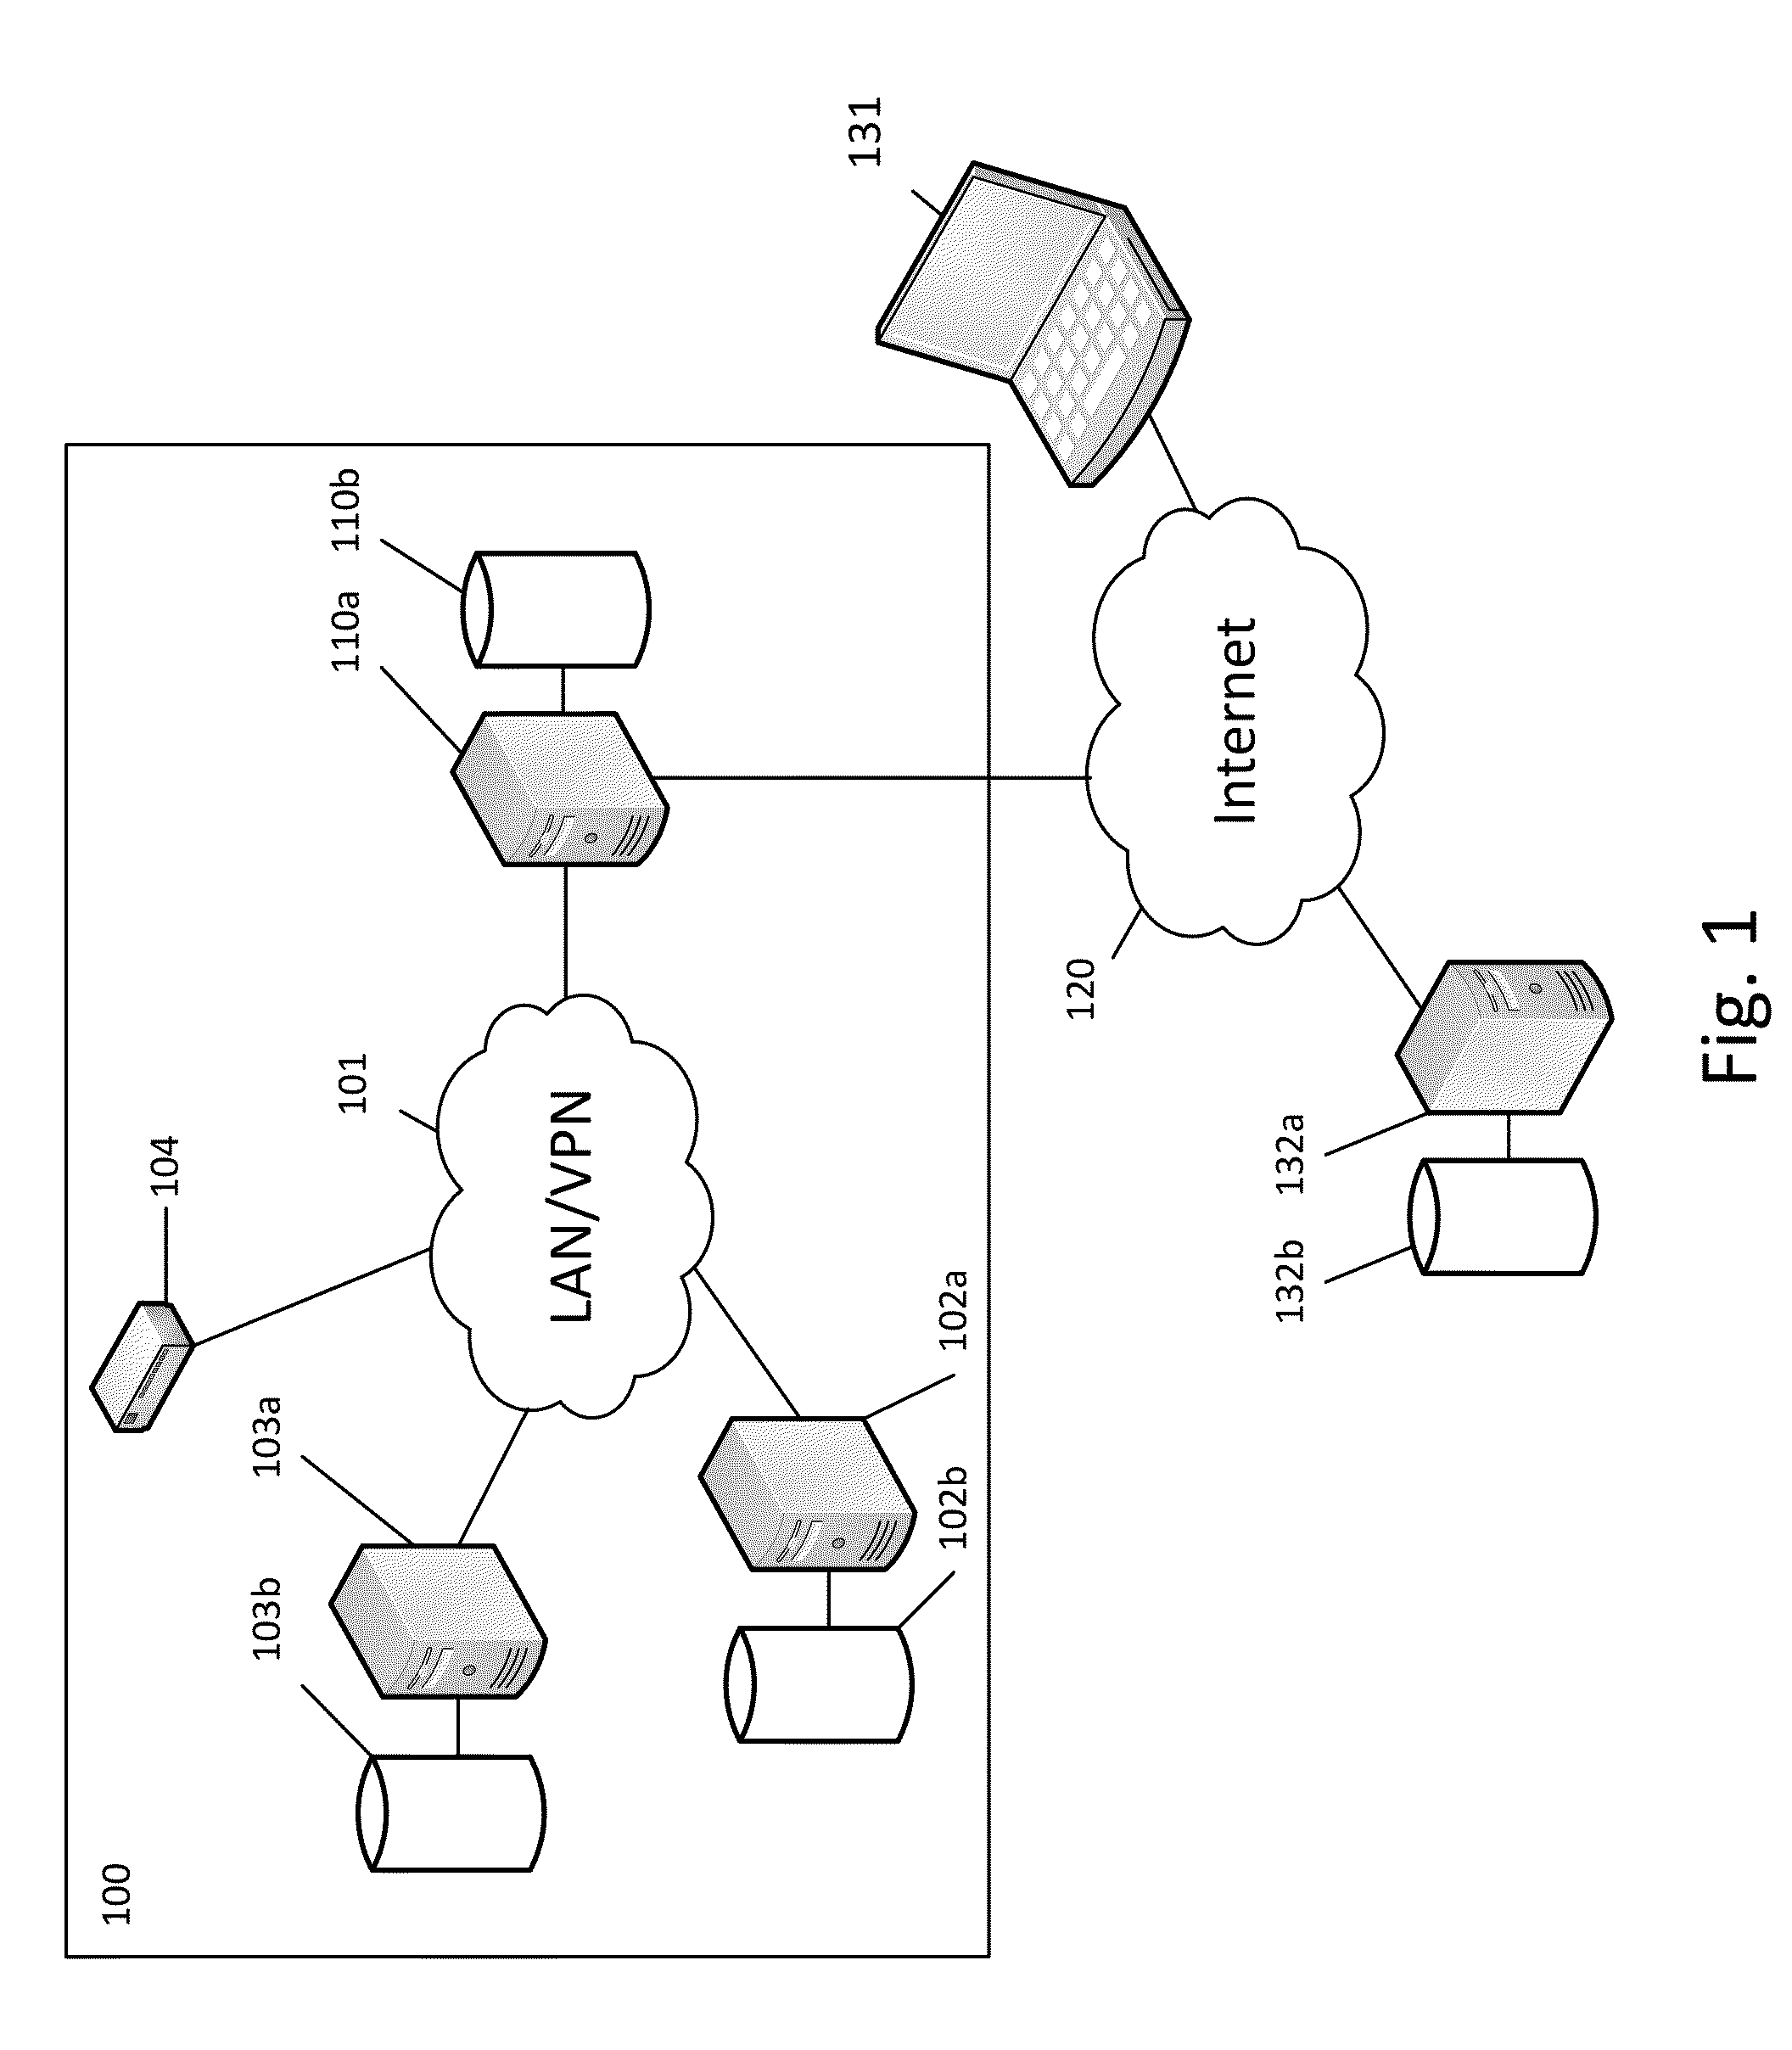 System and Method for Assessing Risk and Marketing Potential Using Industry-Specific Operations Management Transaction Data